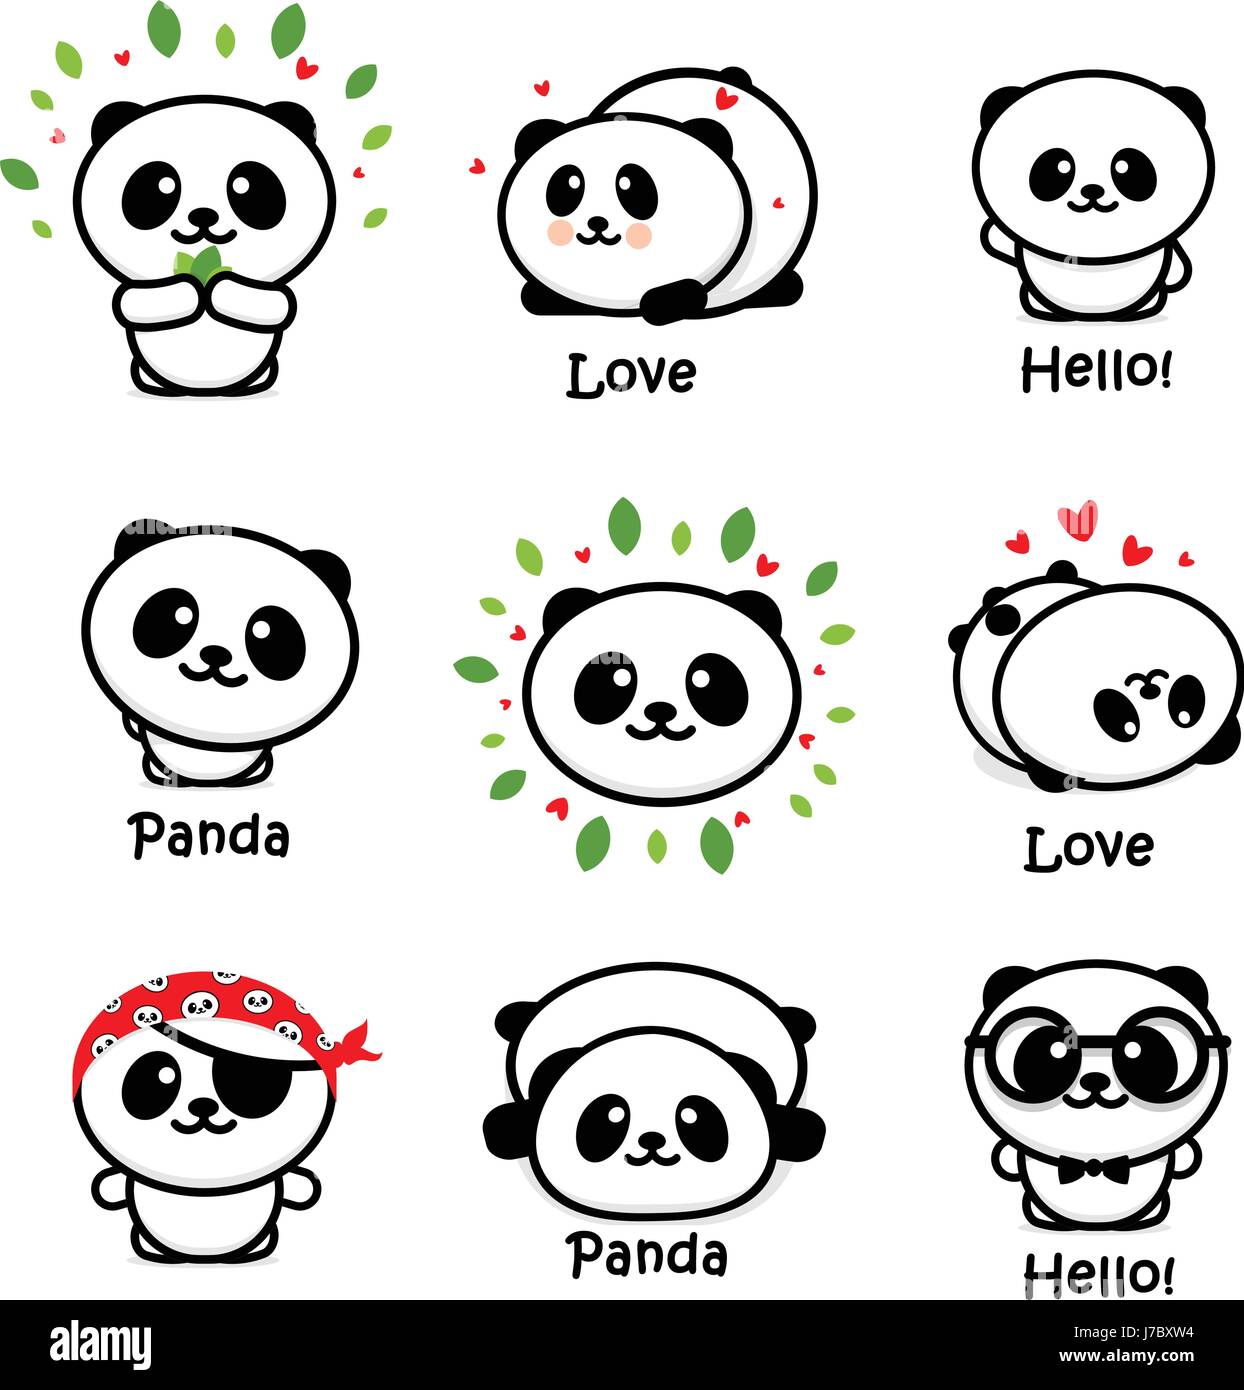 Cute Panda Asian Bear Vector Illustrations, Collection of Chinese Animals Simple Logo Elements, Black and White Icons Stock Vector